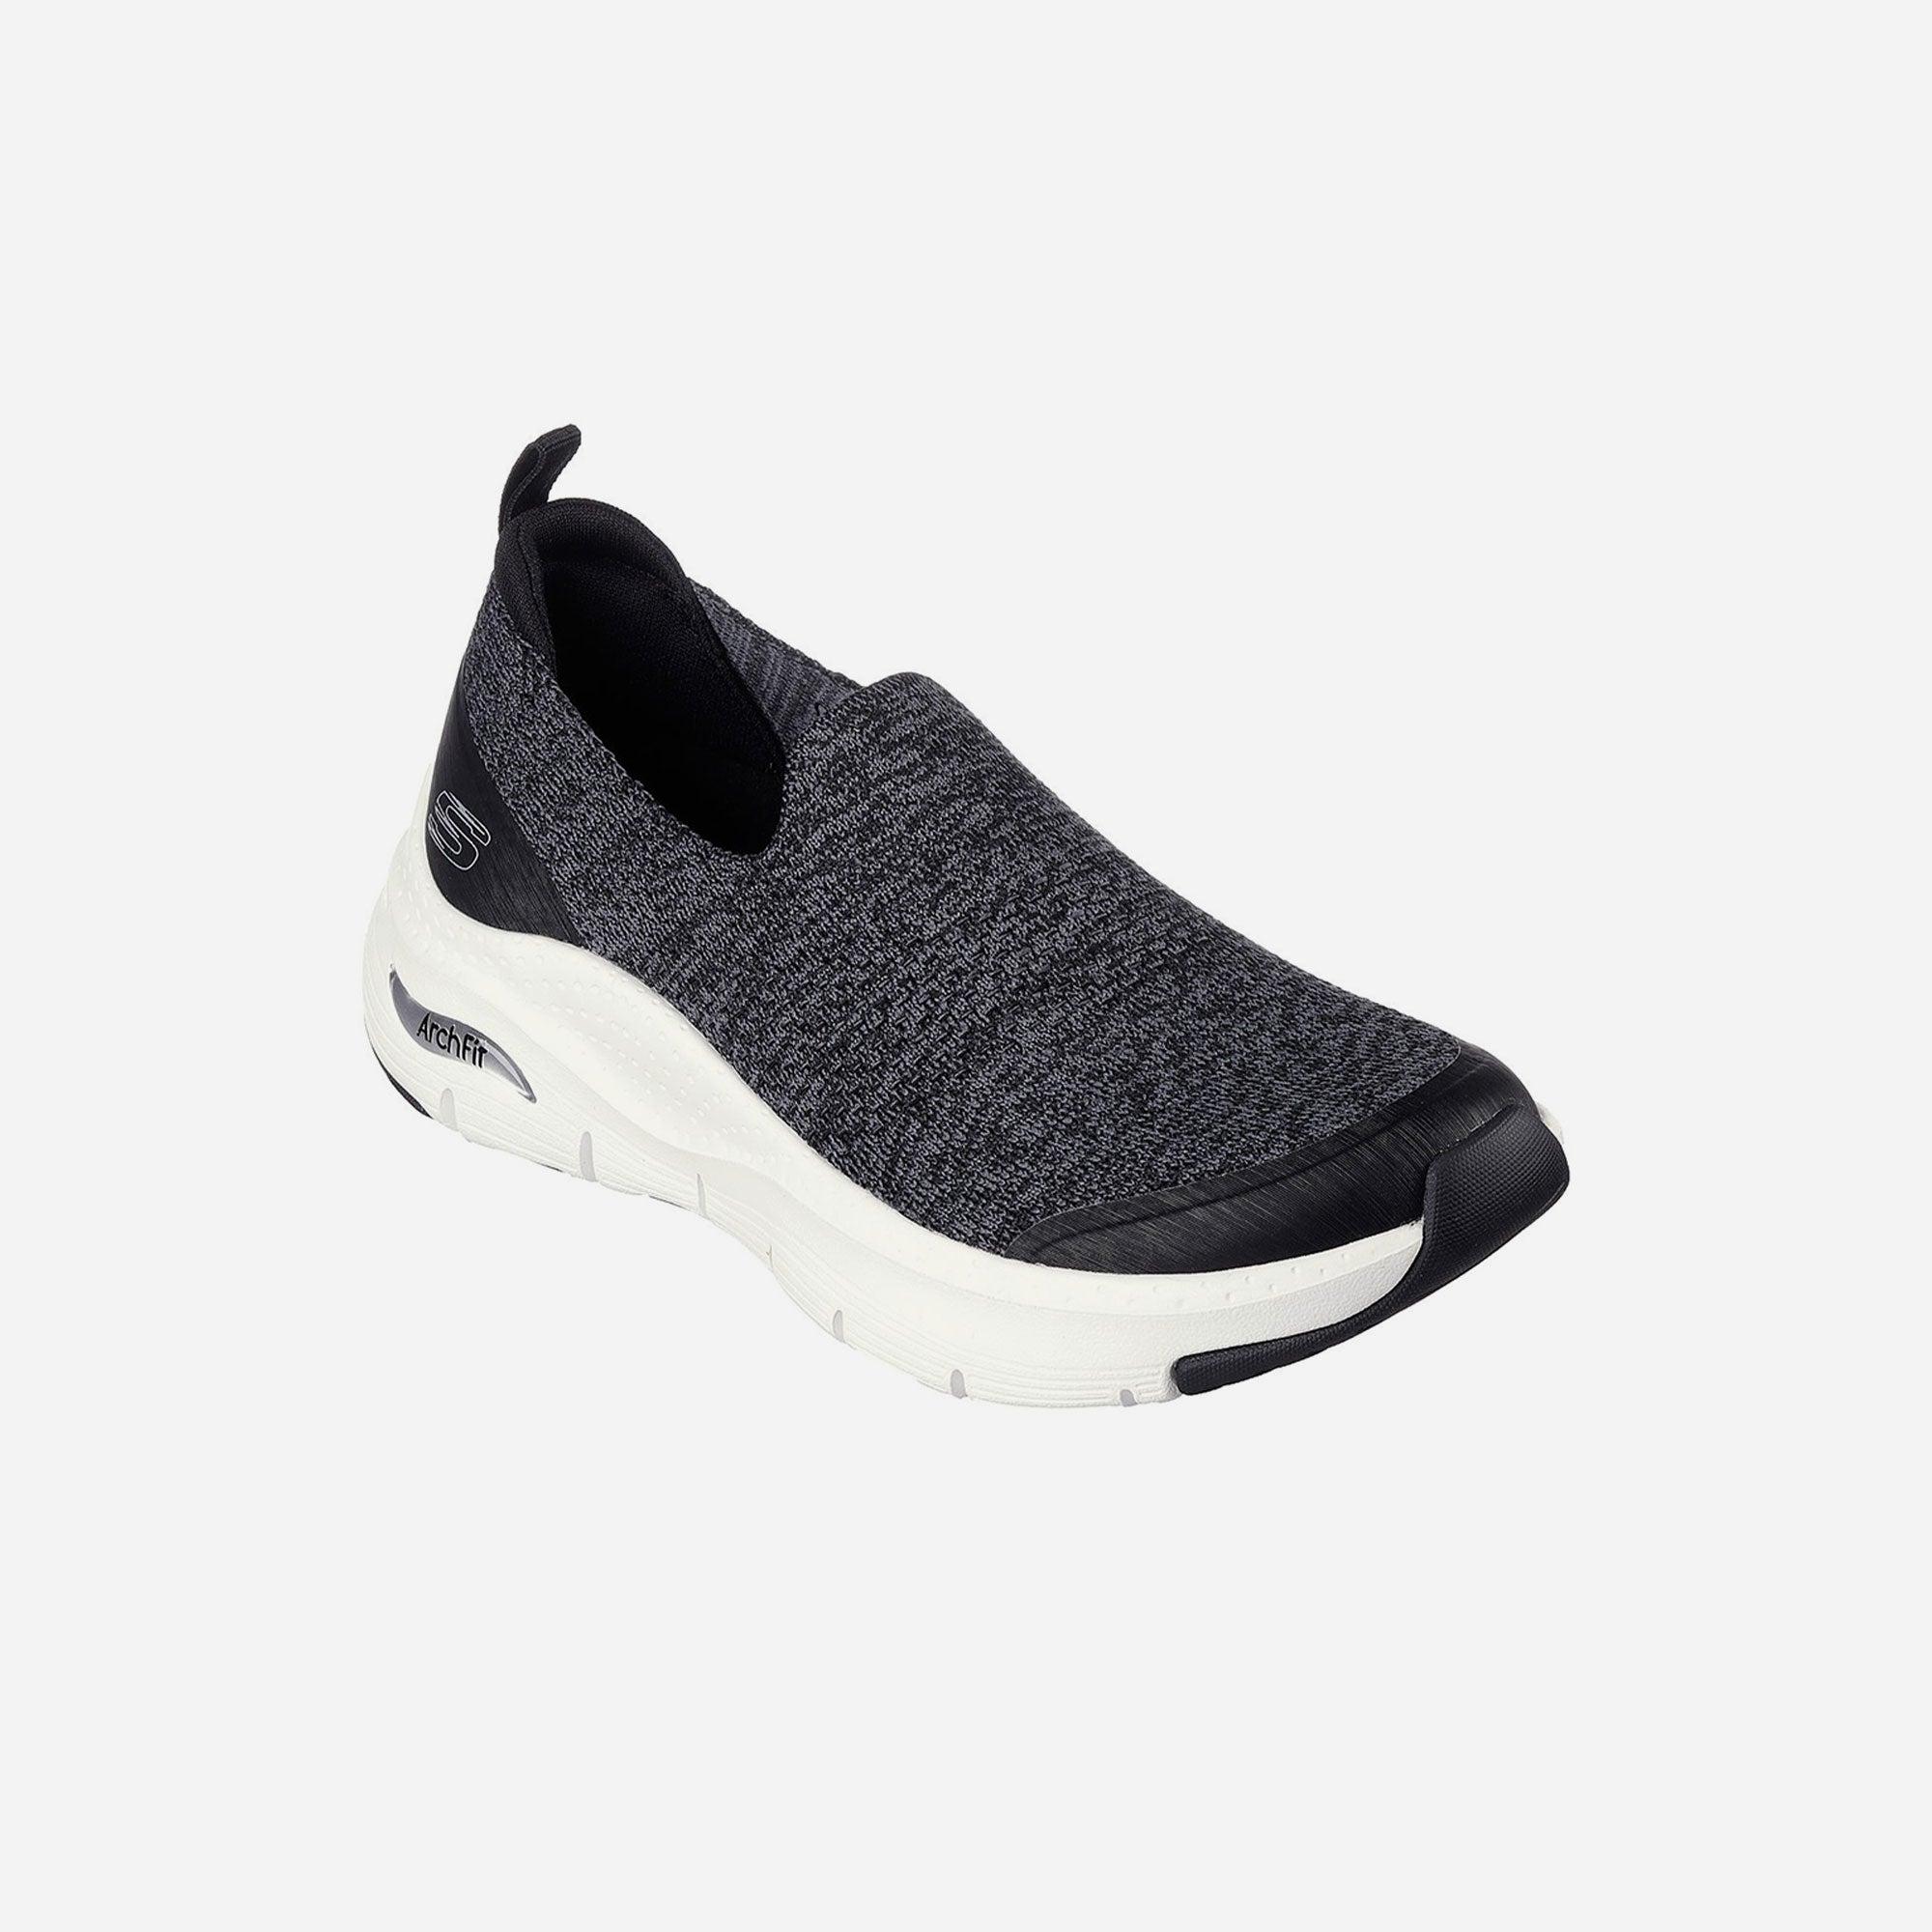 Giày sneakers nữ Skechers Arch Fit - 149563-BLK